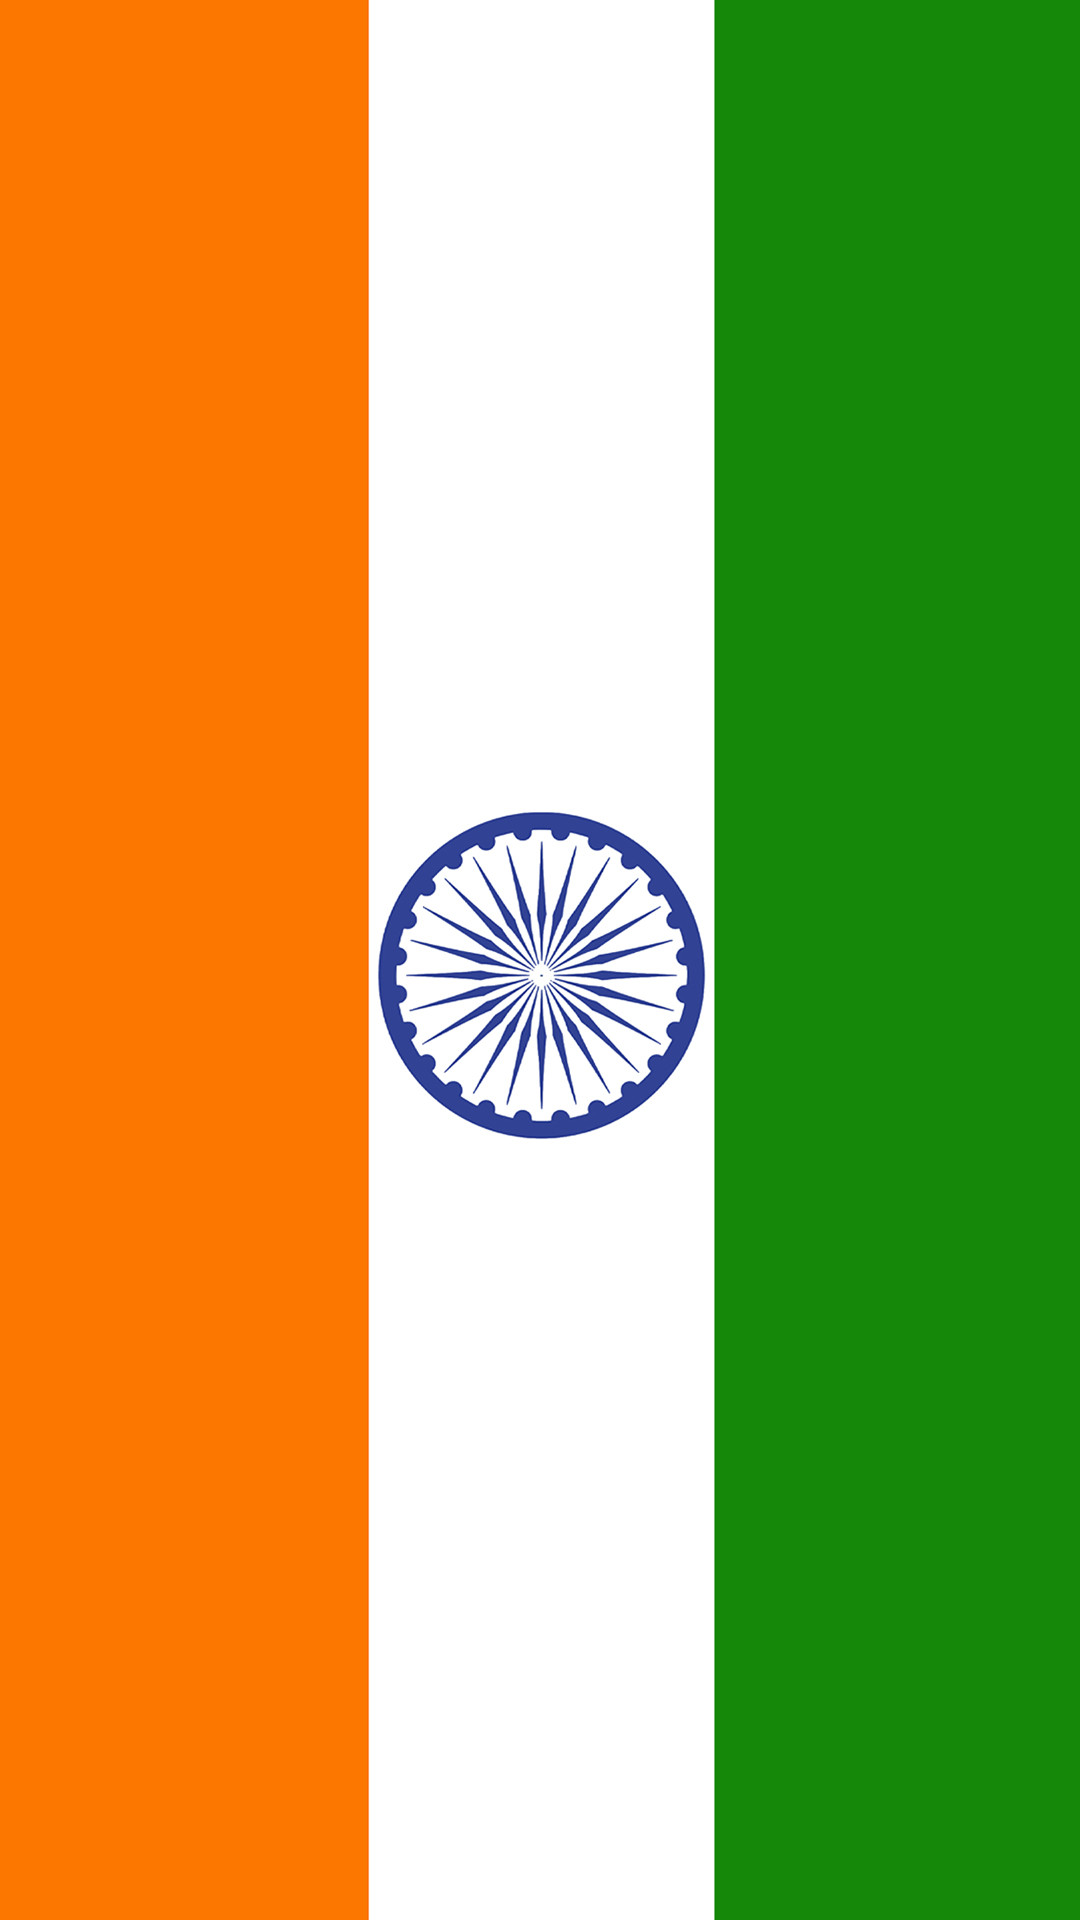 1080x1920 Free Download of India Flag for Mobile Phone Wallpaper 12 of 17 – Vertical India  Flag